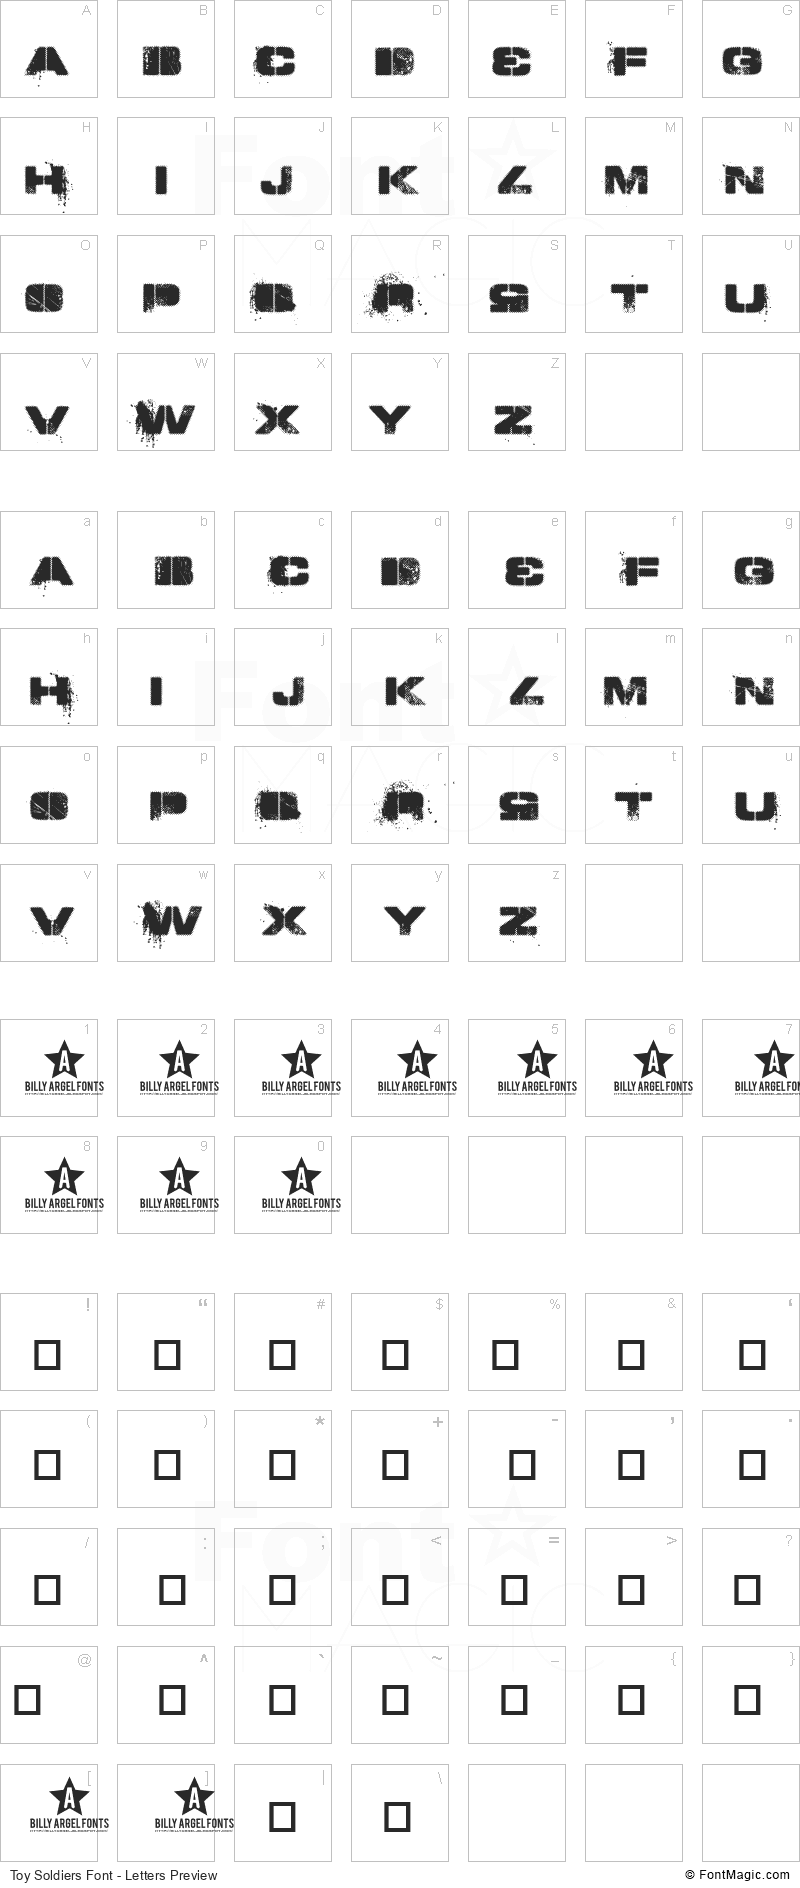 Toy Soldiers Font - All Latters Preview Chart